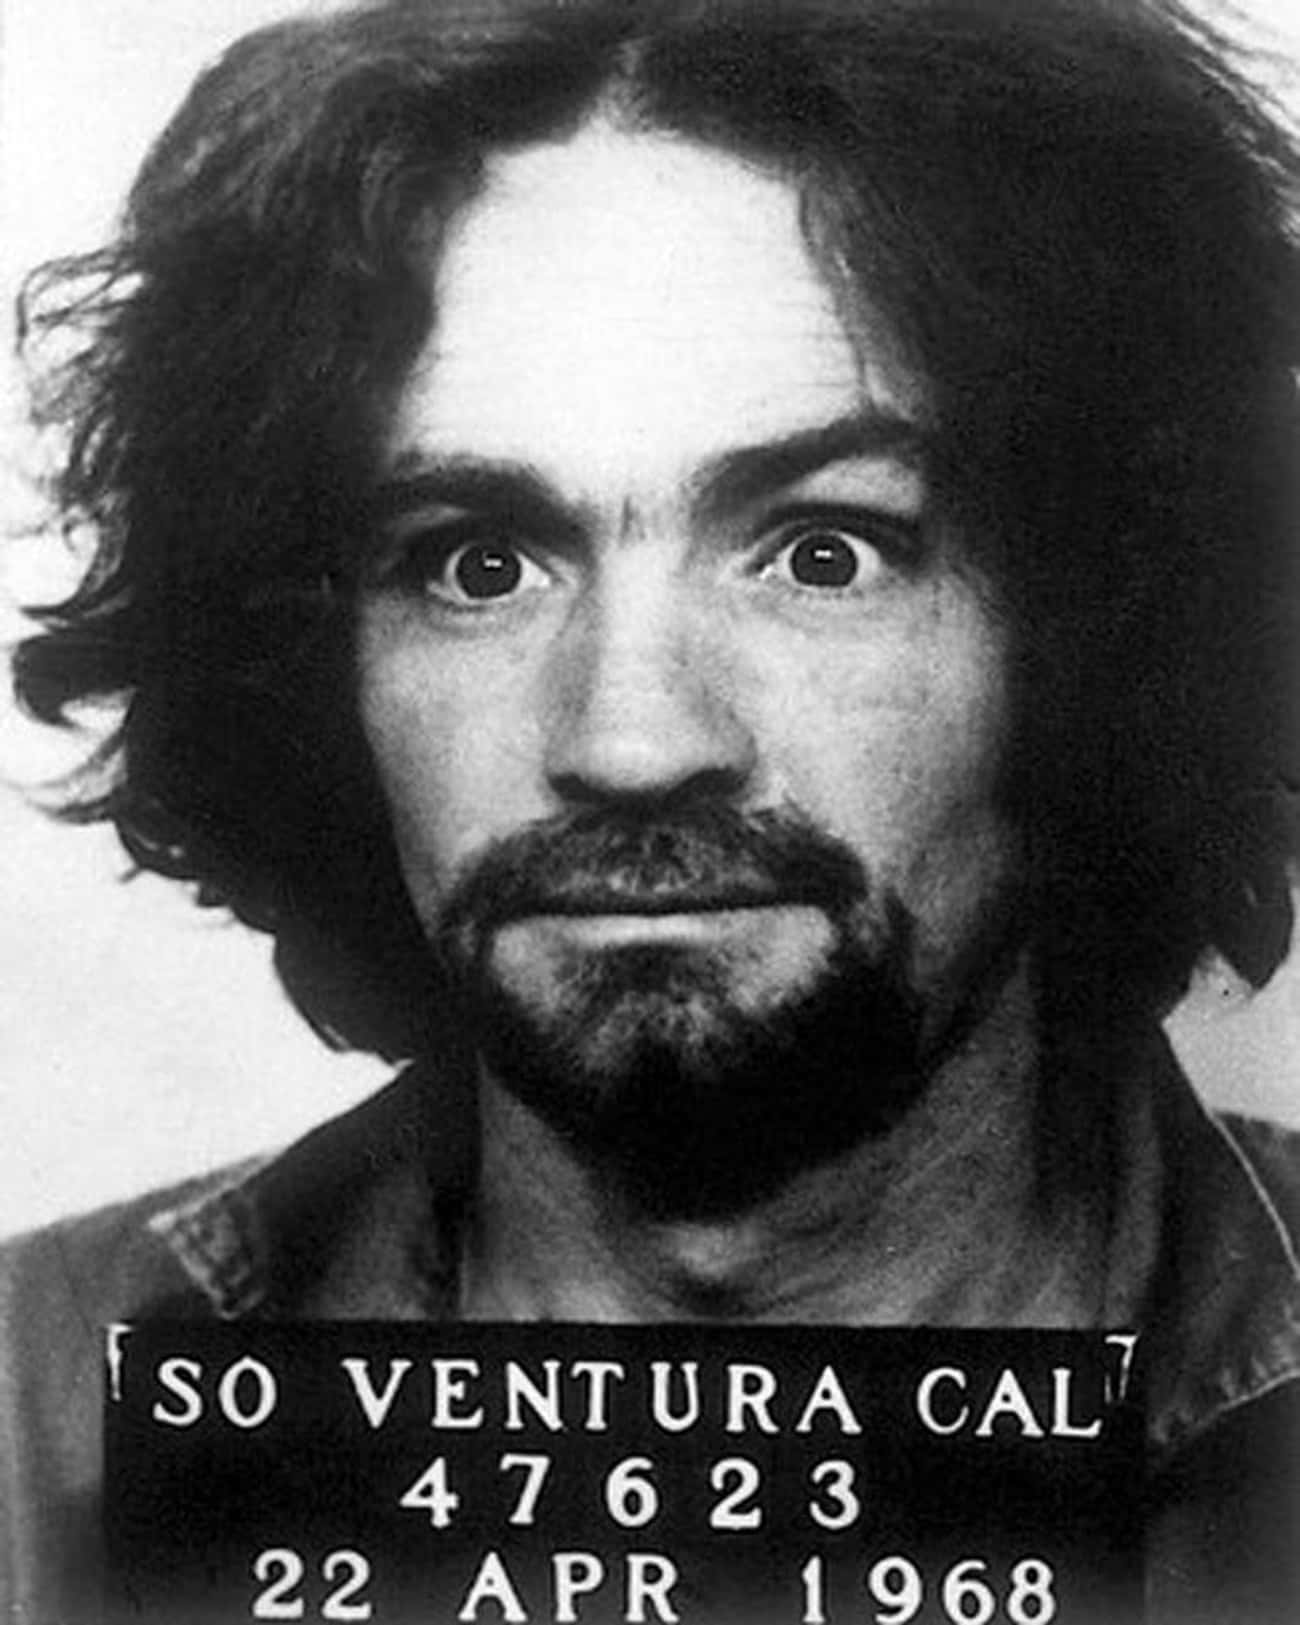 The Manson Family Killed Seven People To Please Their Master